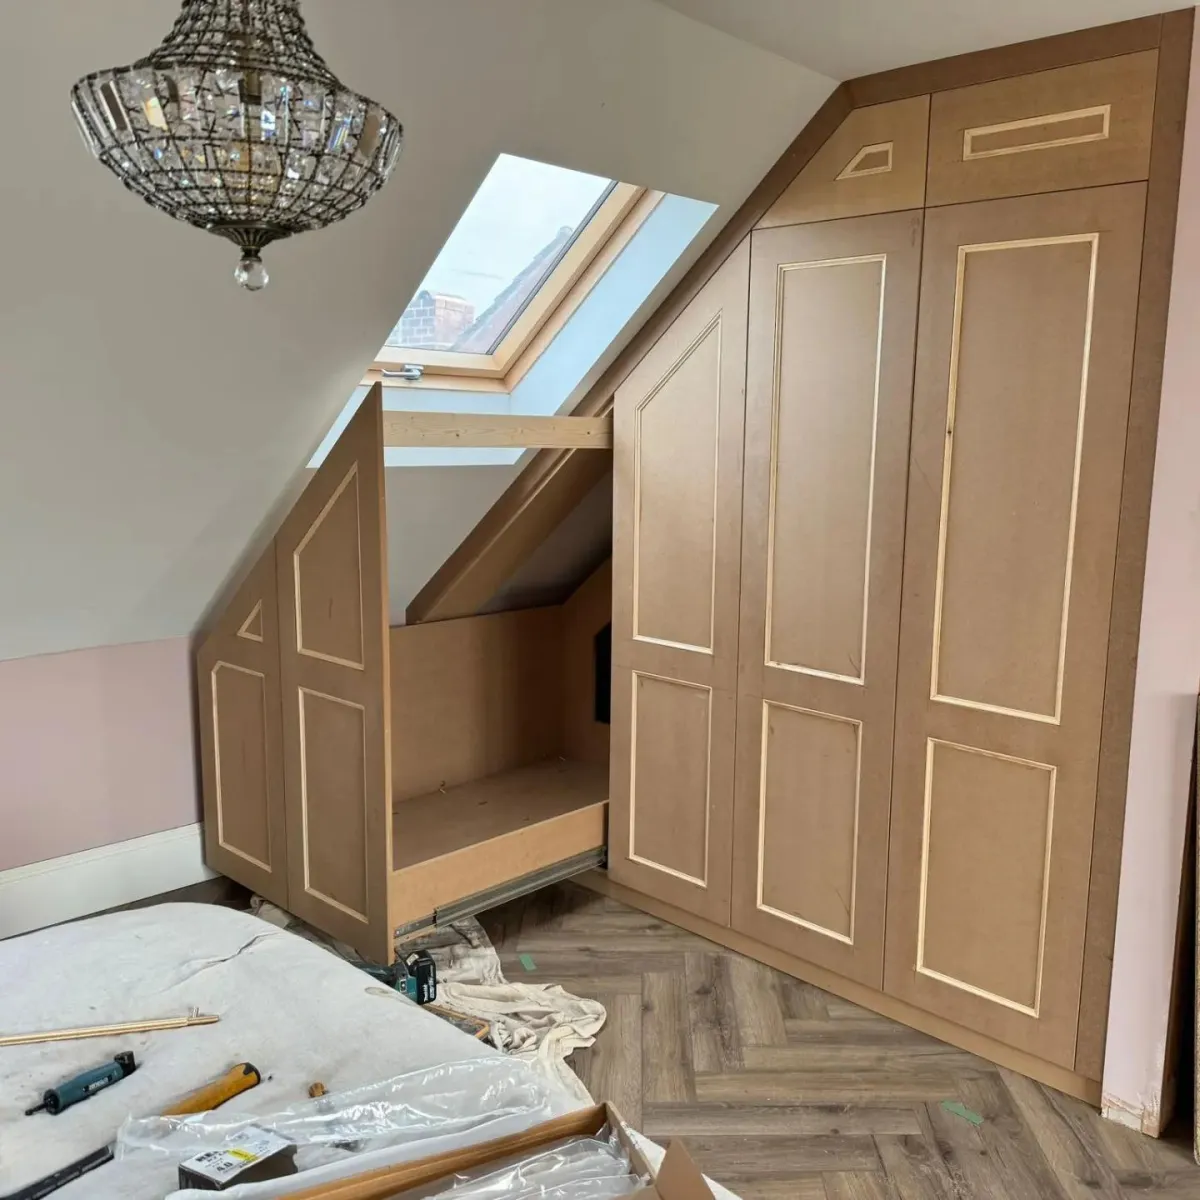 Custom-designed angled fitted wardrobe in an under-eaves space, crafted by a skilled carpenter in the West Midlands, UK, featuring elegant panel doors, bespoke storage solutions, and a neat finish that complements the room's sloped ceiling and hardwood flooring, mid-installation with tools visible.